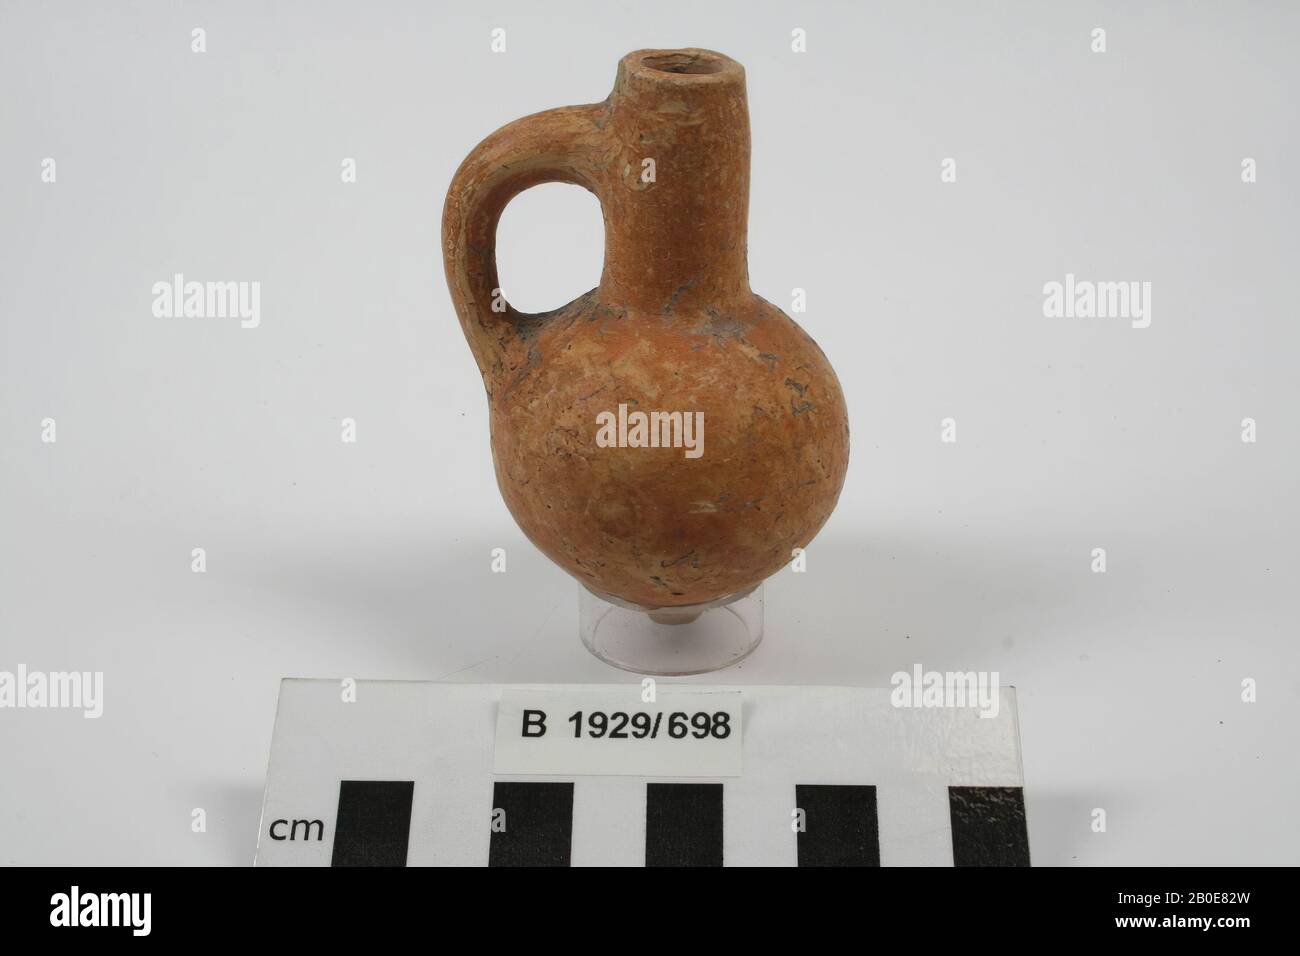 An earthenware jug with long neck, one earpiece and a ball body. The object is red slippled., Crockery, pottery, H 9 cm, D belly 5.6 cm, Iron Age II 925-539 BC, Palestine Stock Photo